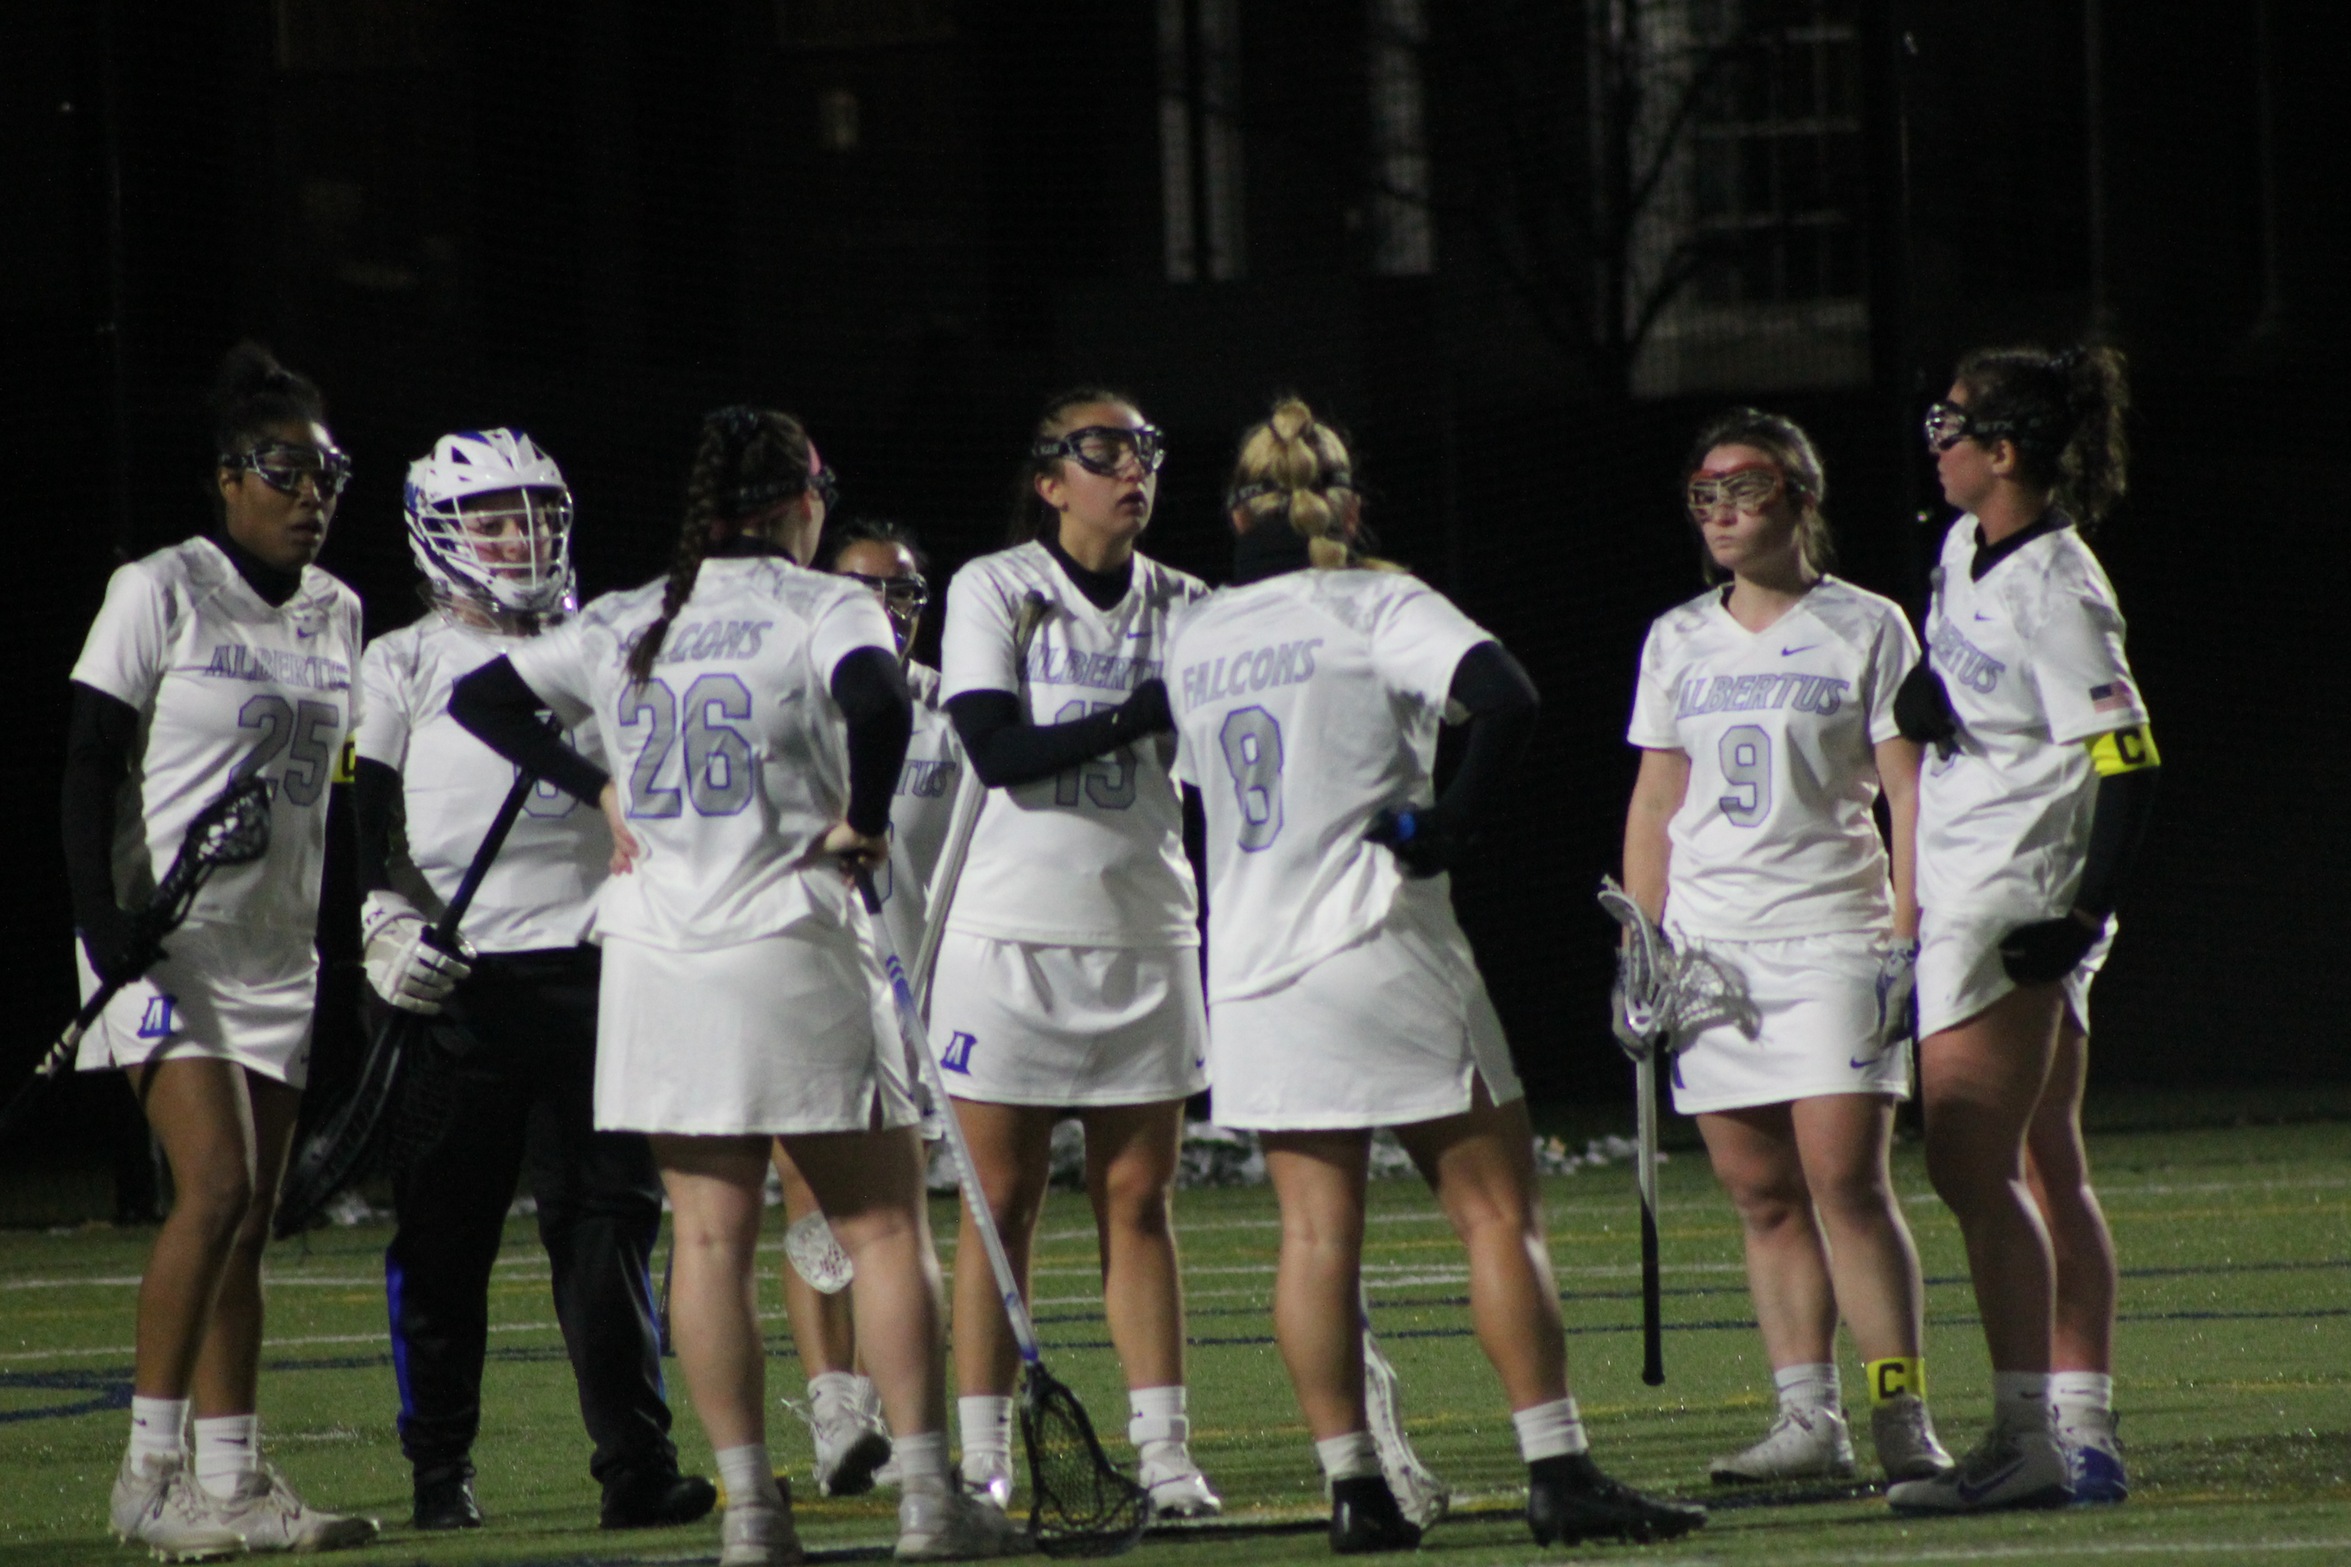 Women’s Lacrosse Upended by Maritime, 21-5